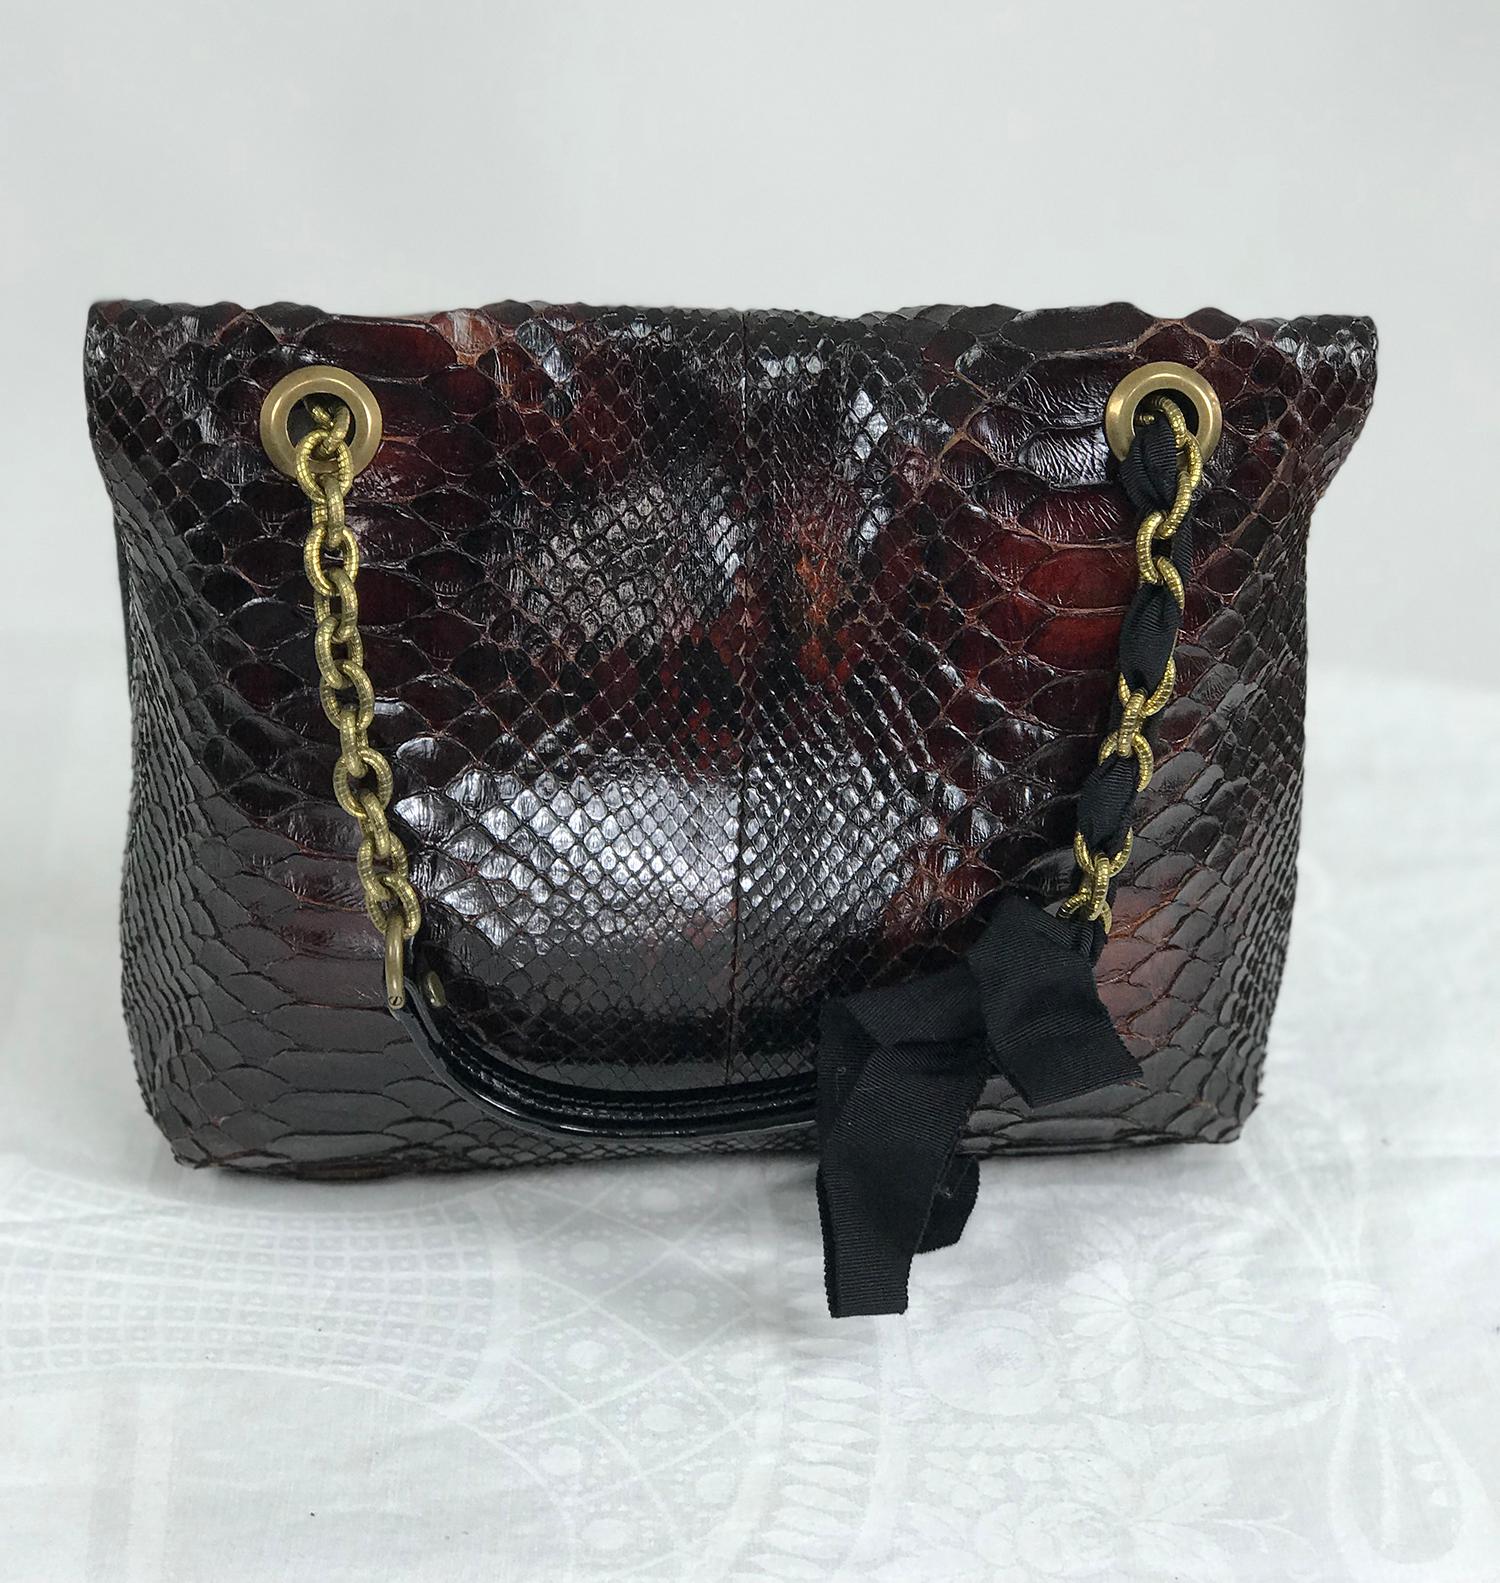 Lanvin Happy shoulder bag, red python with black faille trims and textured gold chain,black patent leather shoulder strap handles, black Lucite turn lock and plate with gold hardware. This beautiful bag is in very good pre owned condition. 
The bag